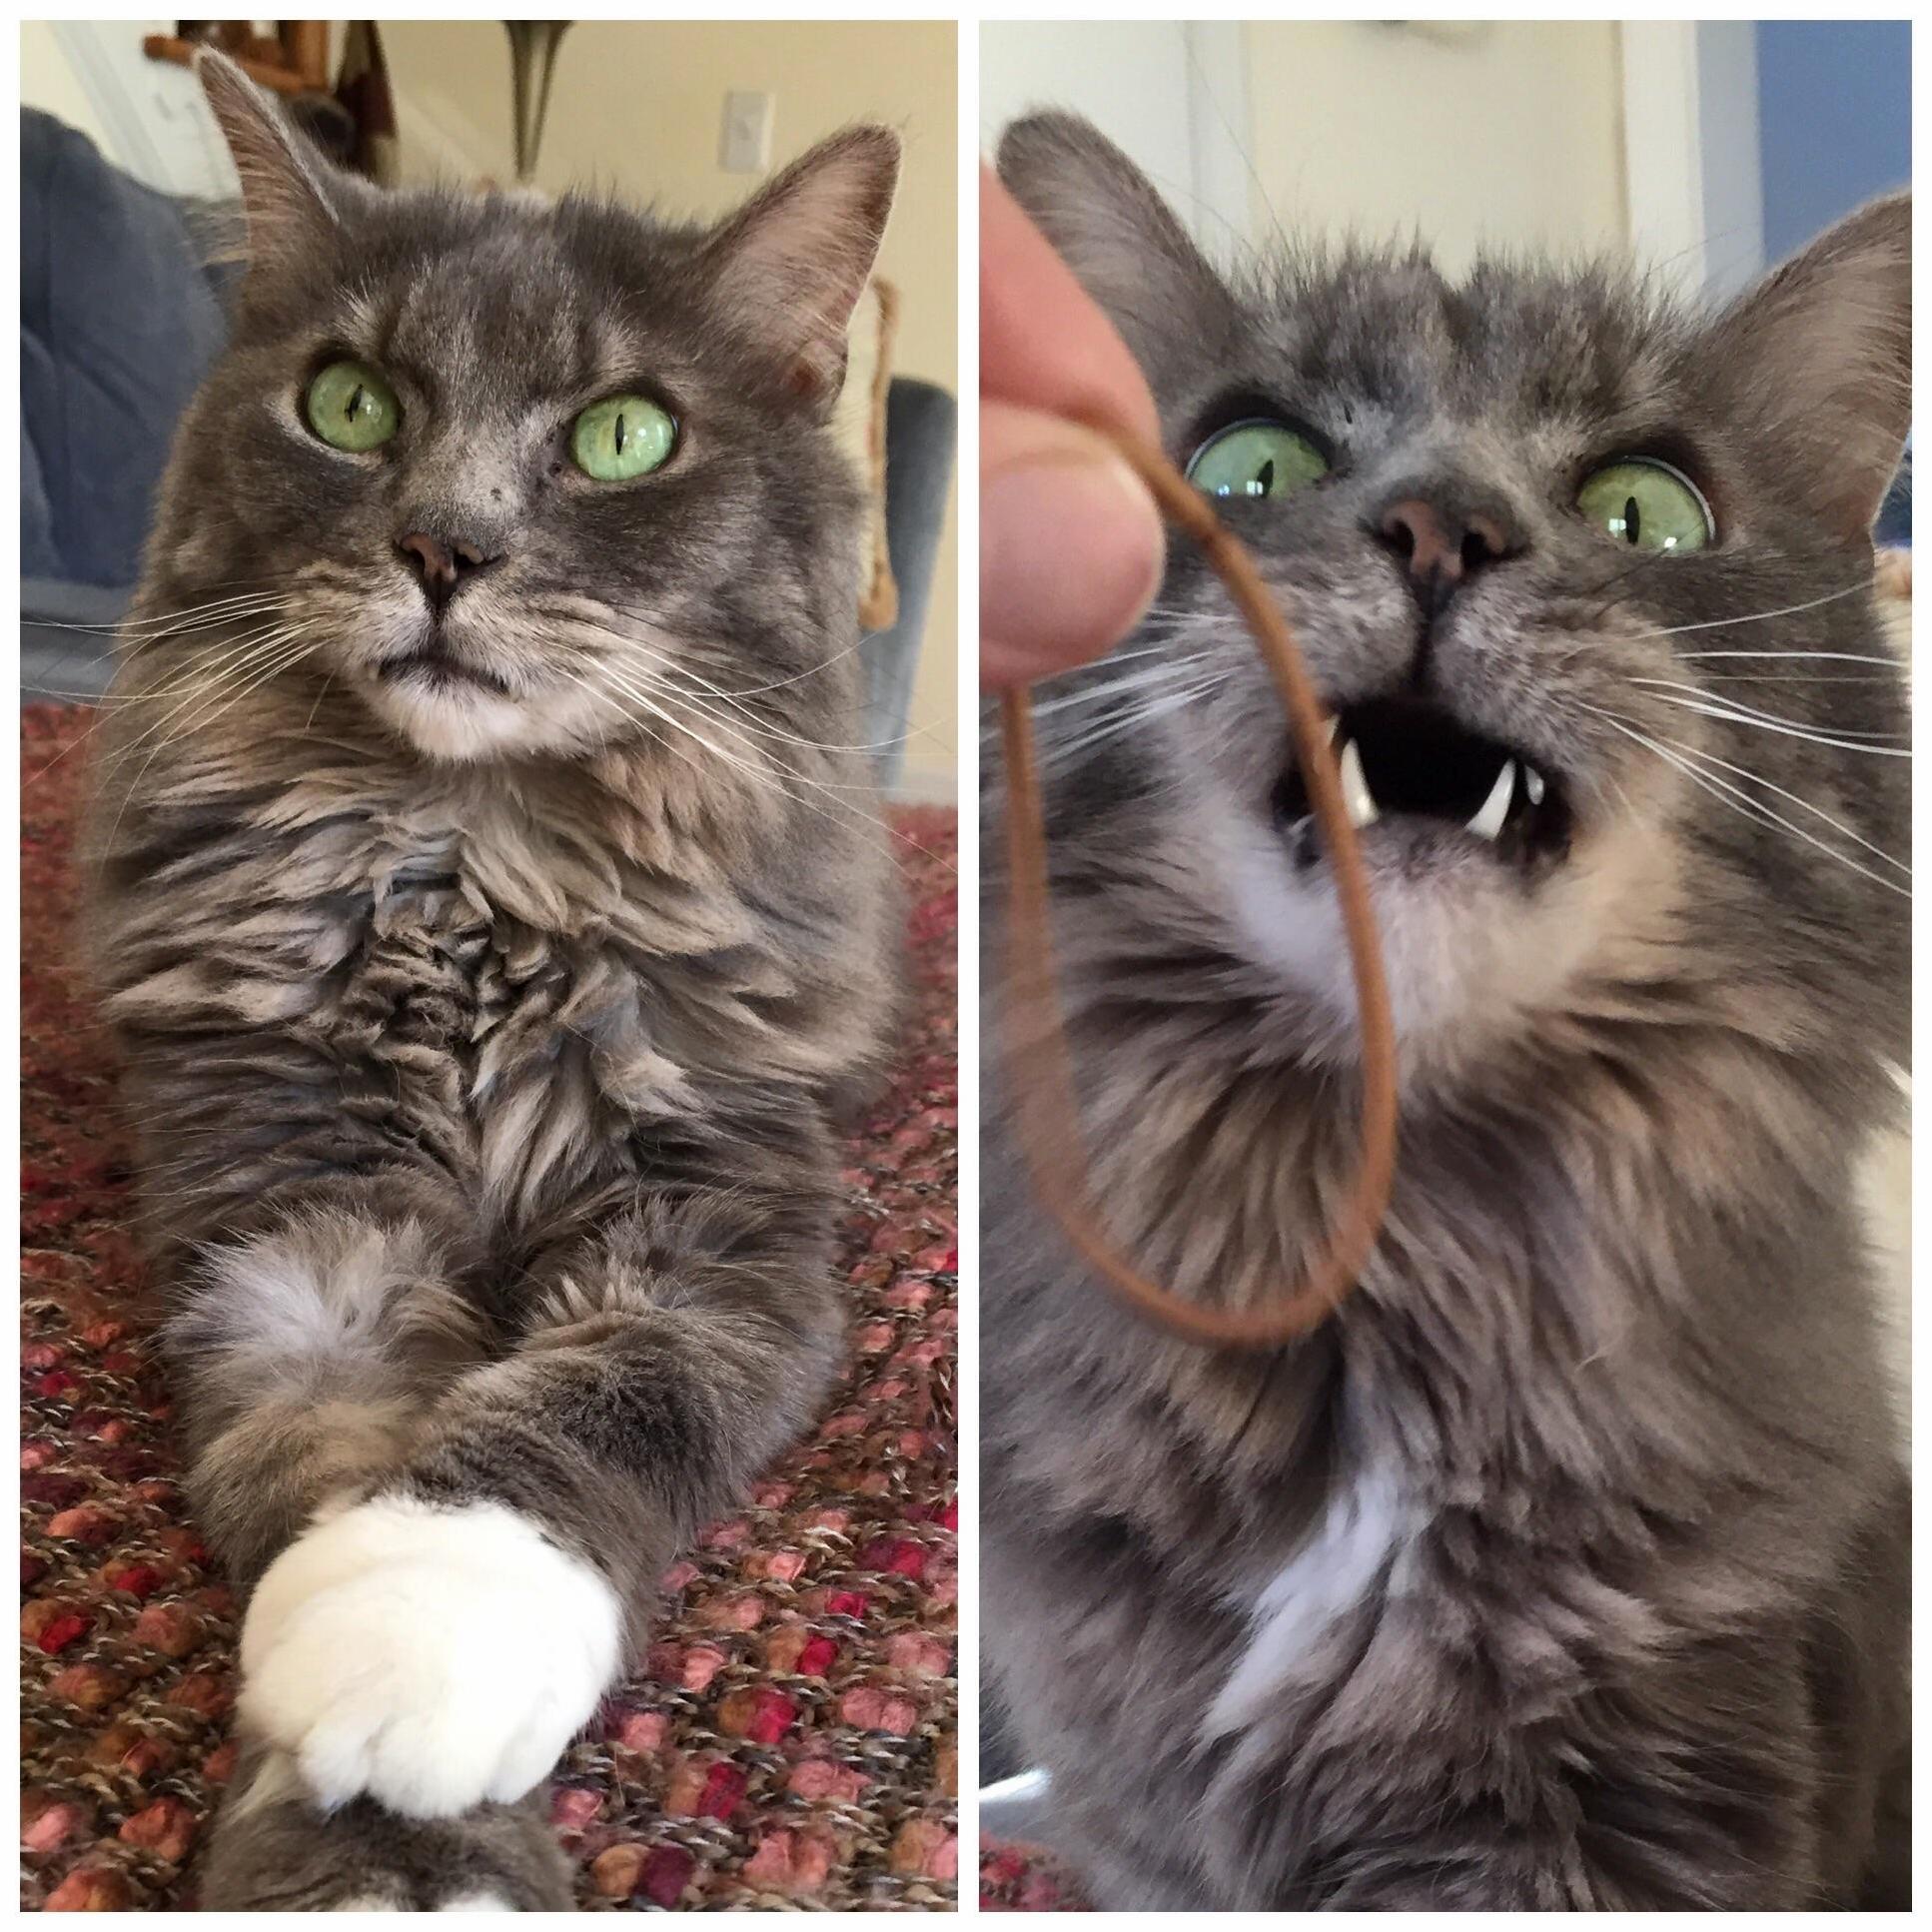 Bowser before and after discovering the hair tie in my hand.